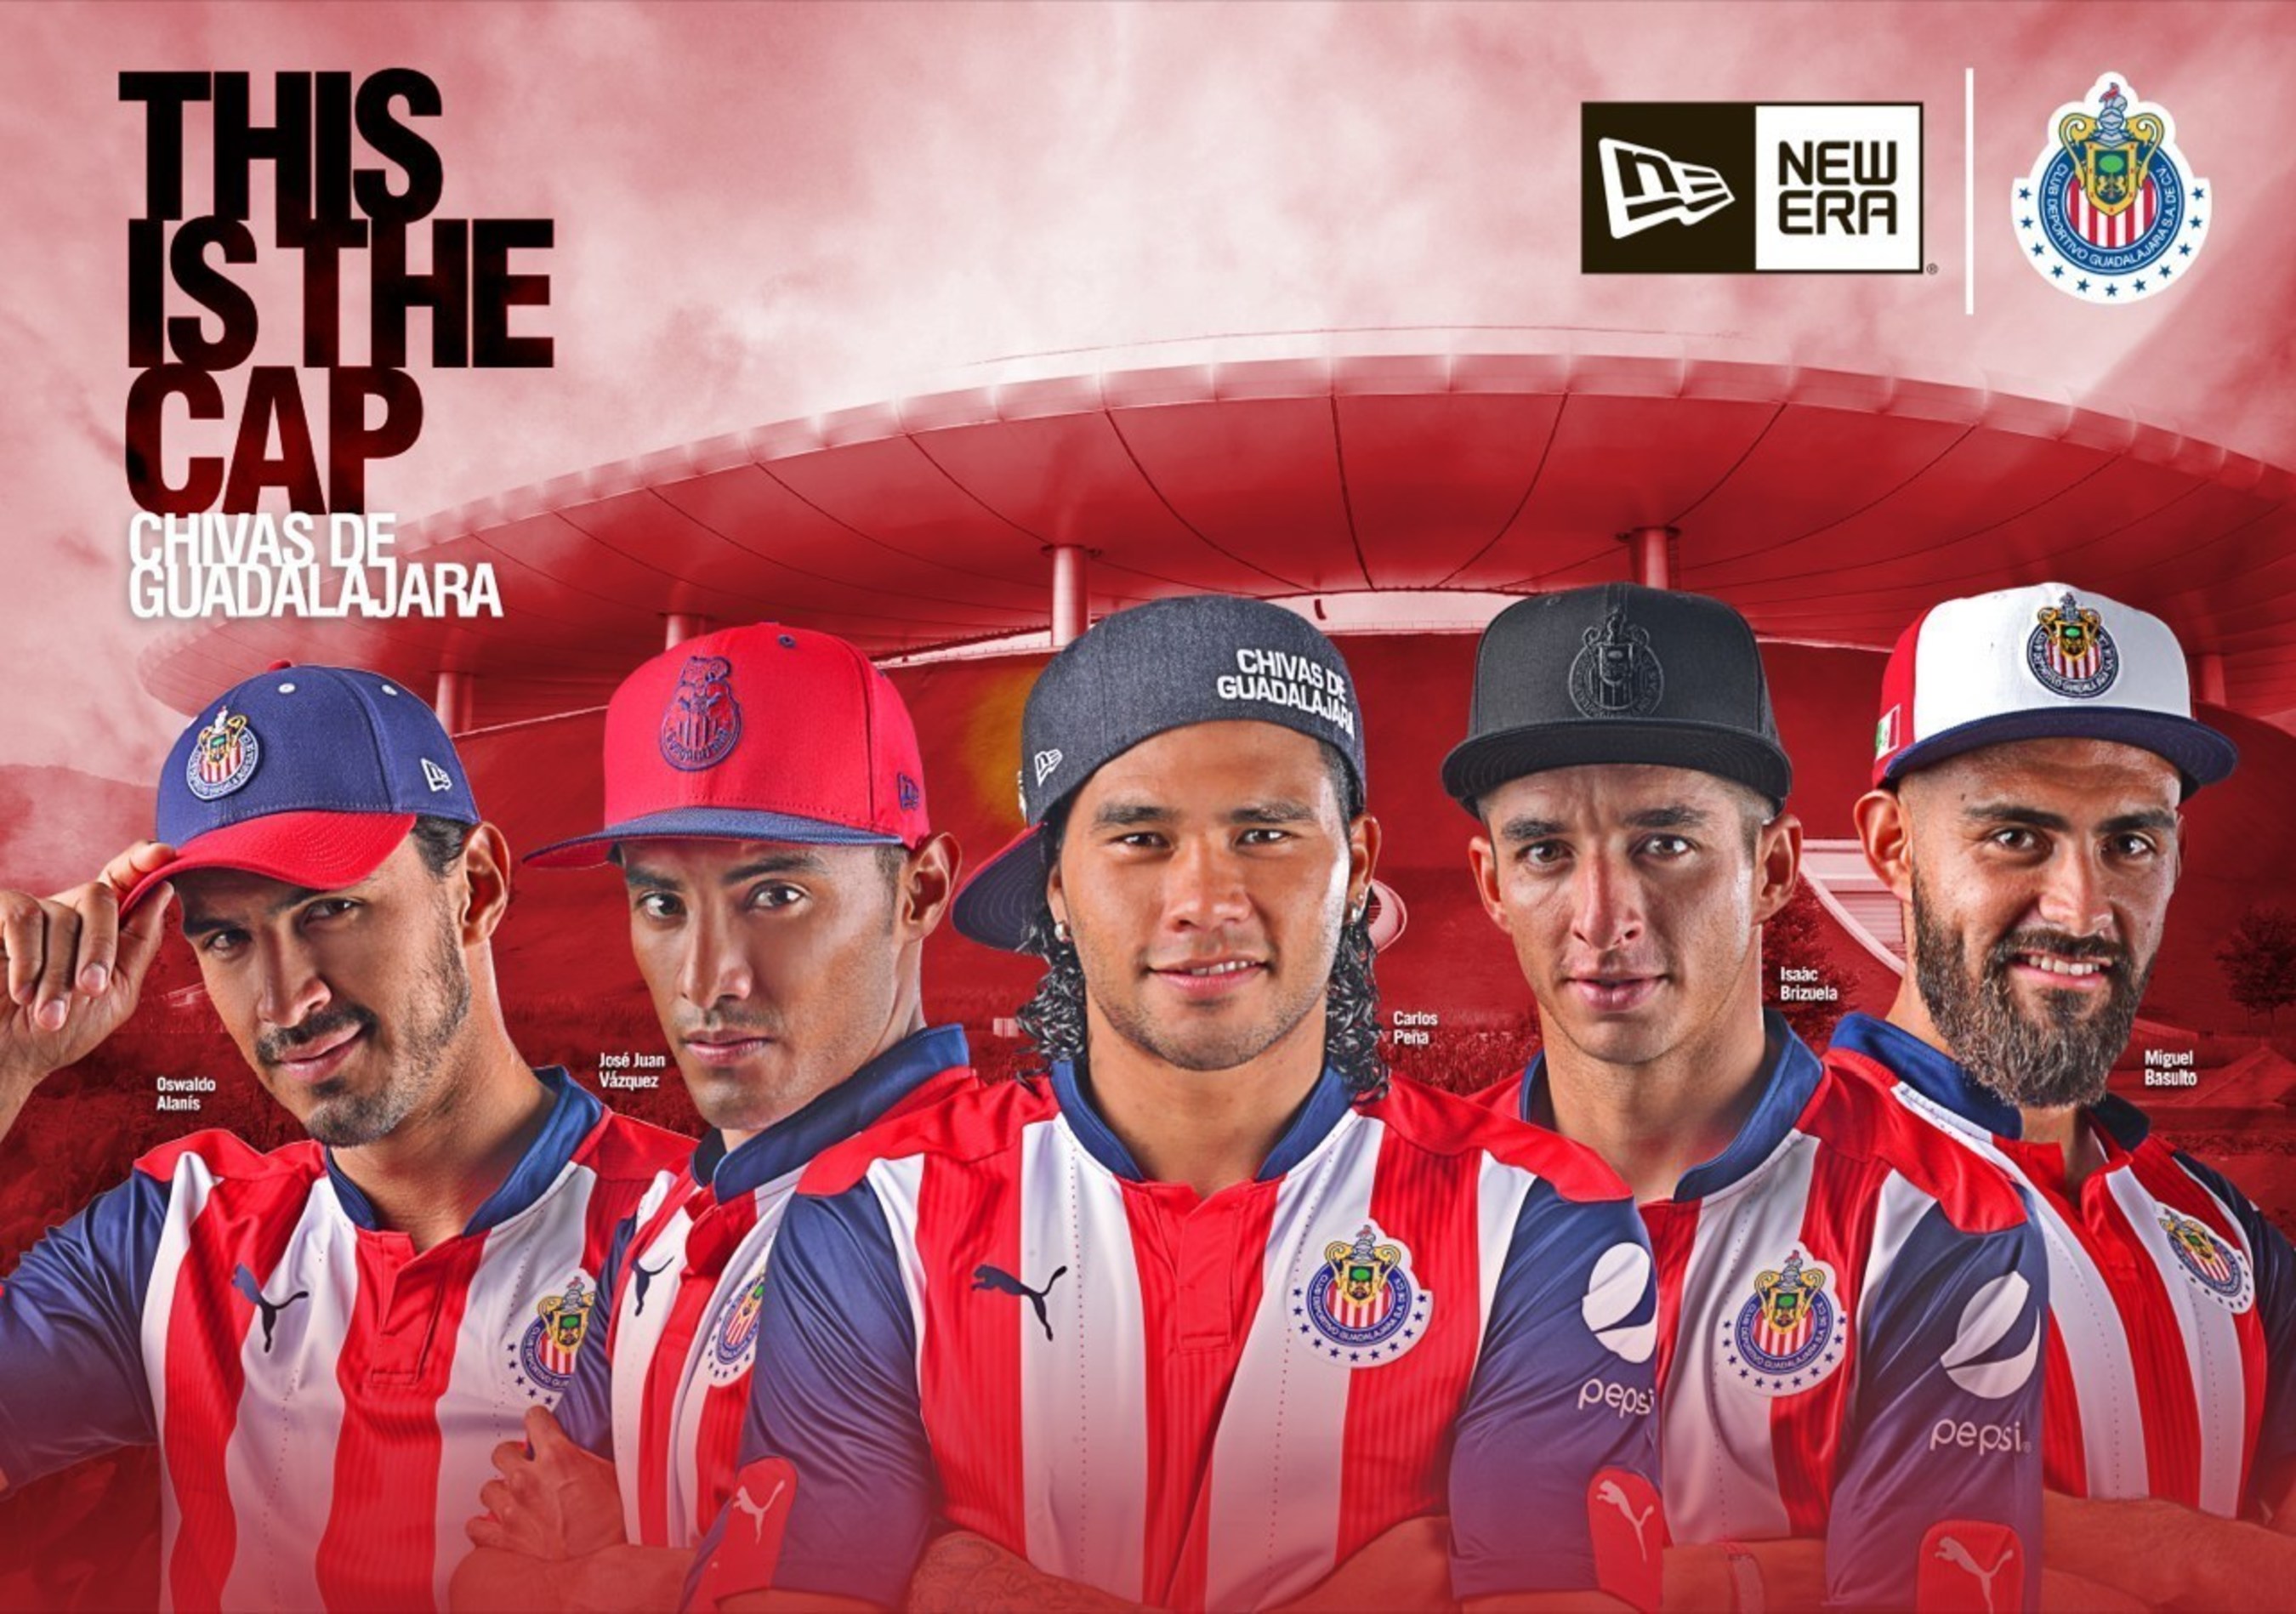 New Era, the world's leading sports and lifestyle headwear brand, announces a partnership with Club Deportivo Guadalajara, the soccer club with the biggest Mexican fan base in the world on August 17, 2016. (Photo Credit: New Era Cap)